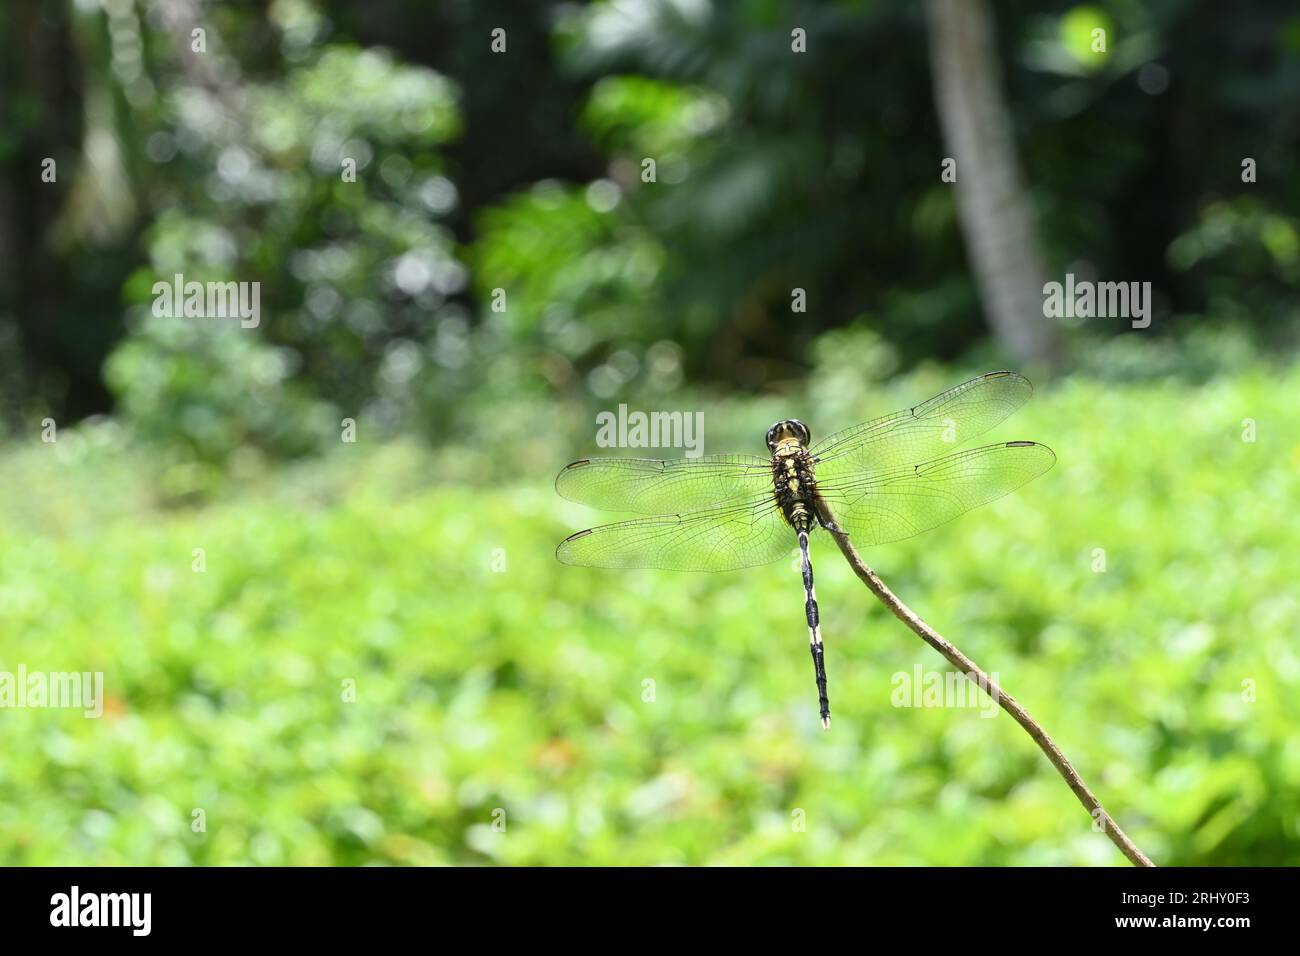 View of the Dorsal back area of a Green Marsh Hawk dragonfly perched on top of an elevated stem tip Stock Photo